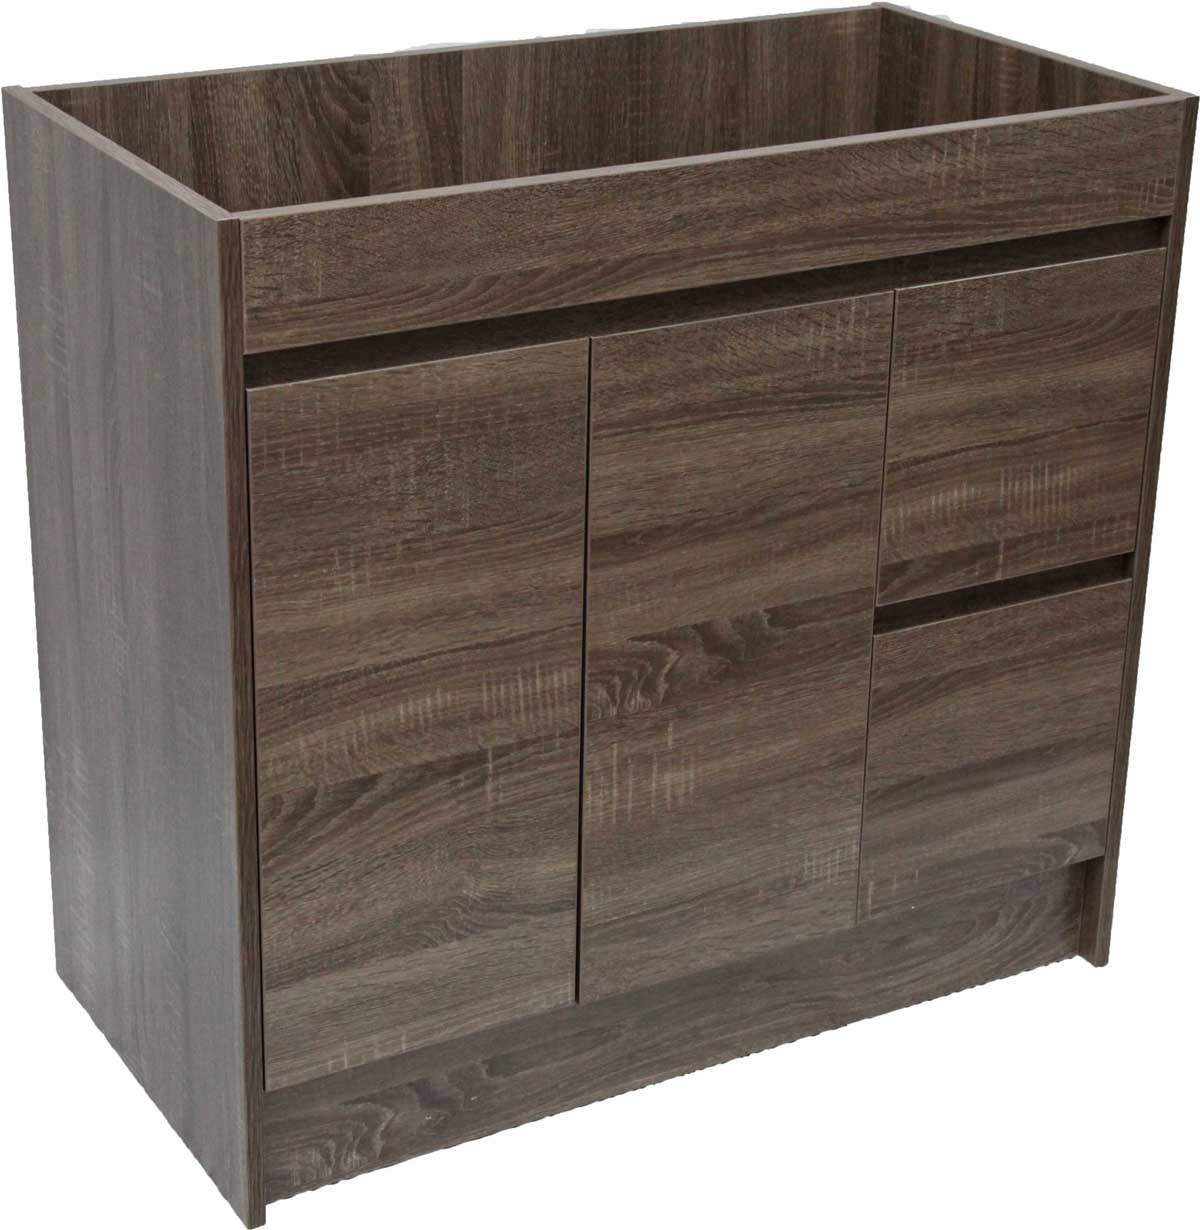 Jane Series 900 Cabinet Only